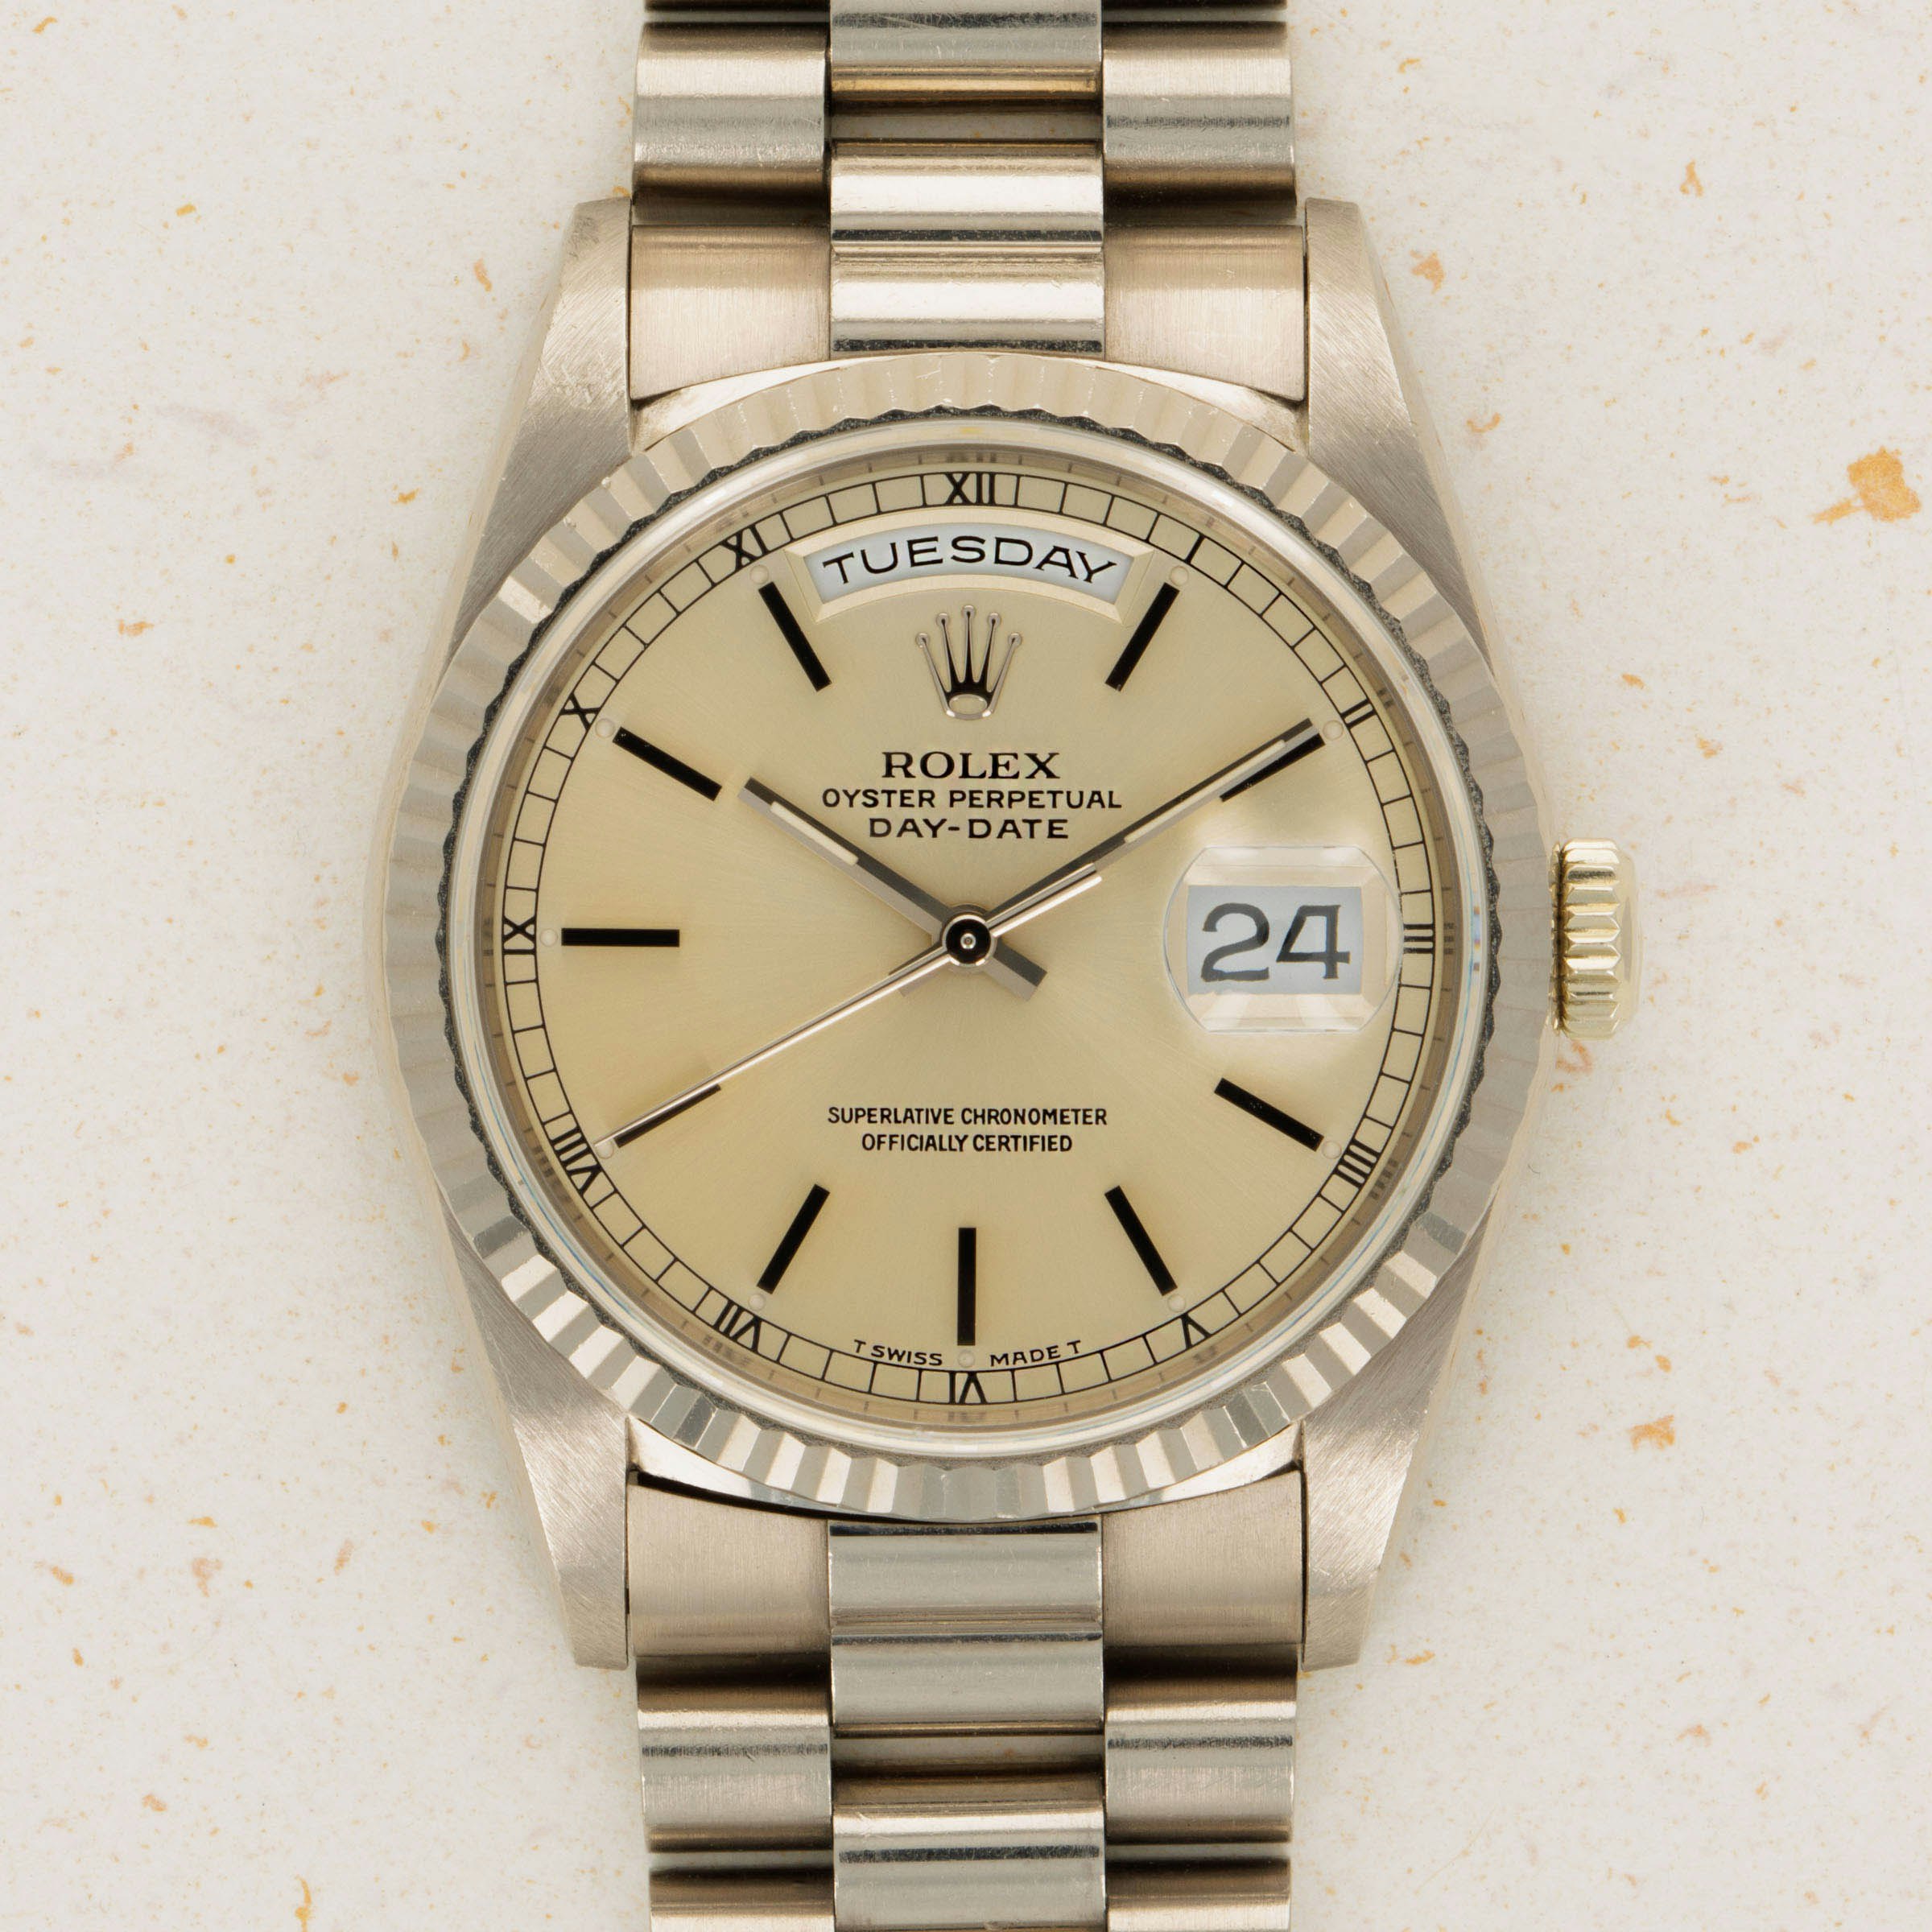 Thumbnail for Rolex Day-Date 18239 18k WG Silver Dial 